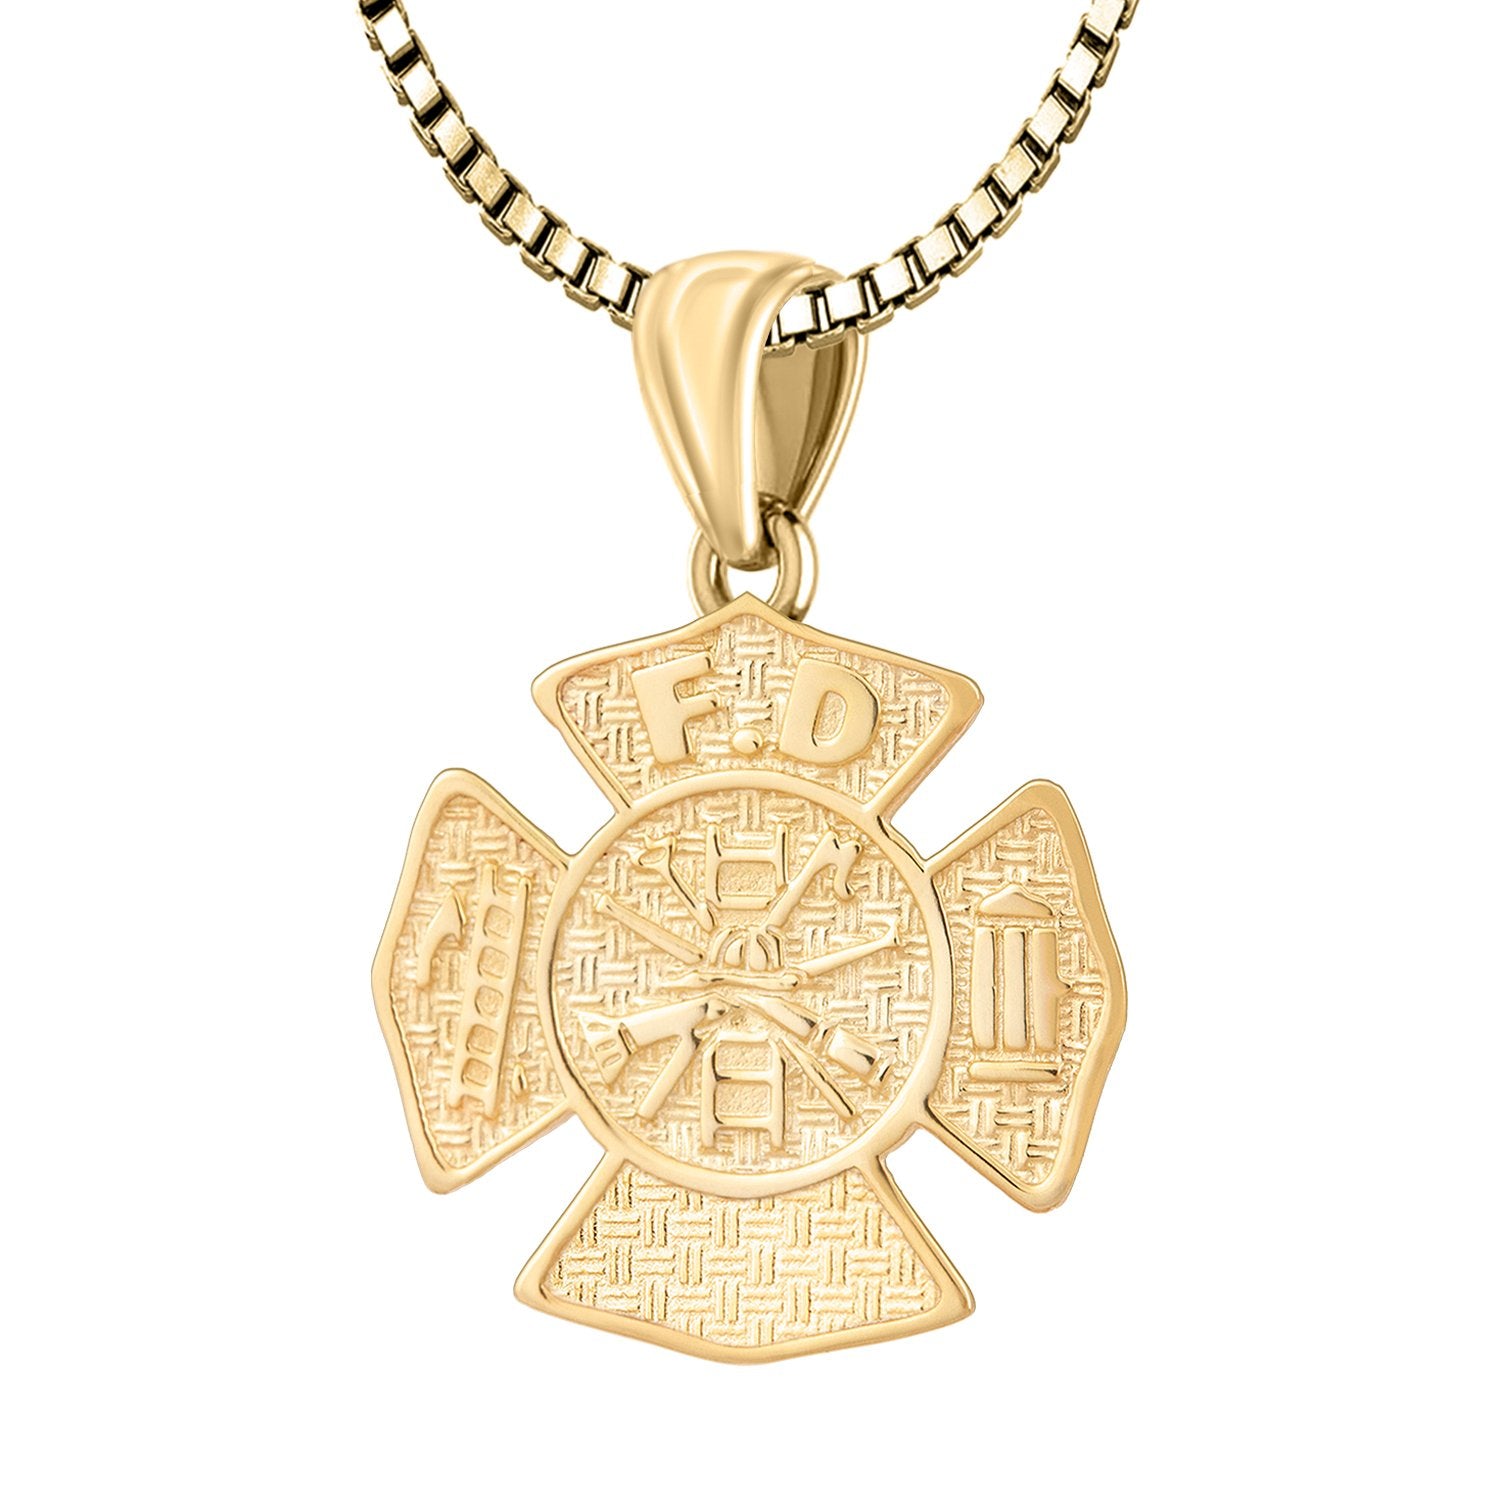 Firefighter Necklace of 26mm in 14k Gold - 2.2mm Box Chain